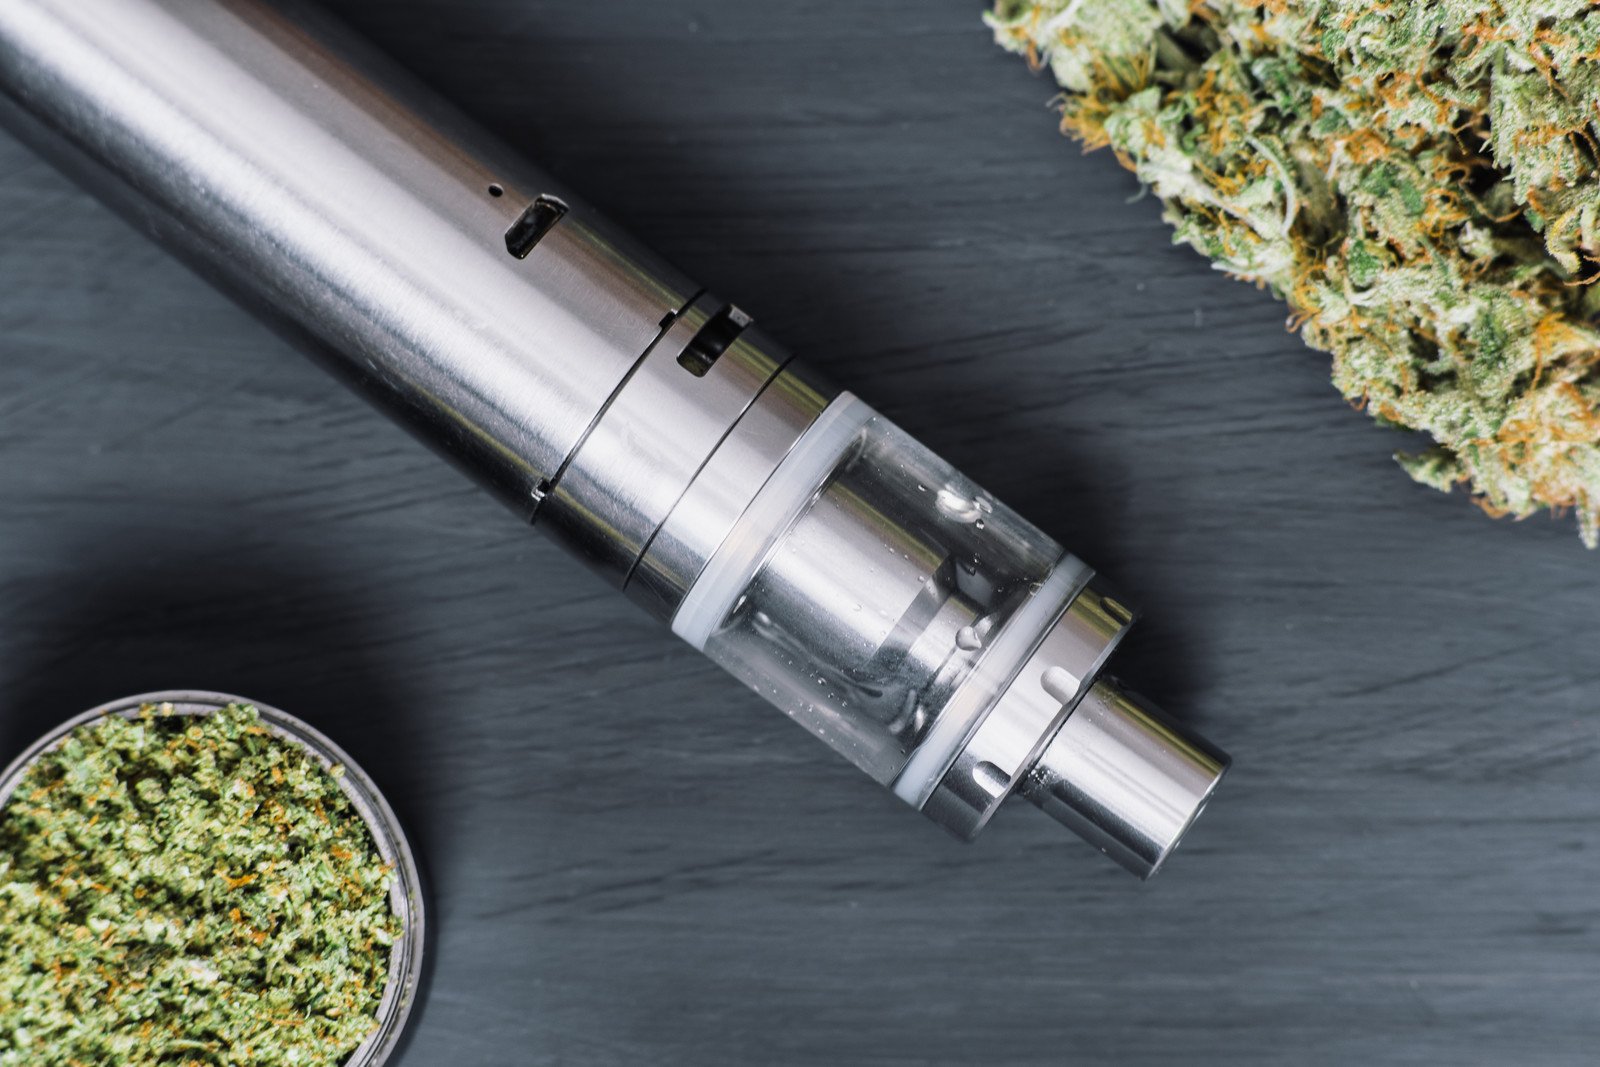 Best Vape Pens and Why. Vape pen on grey surface with weed.